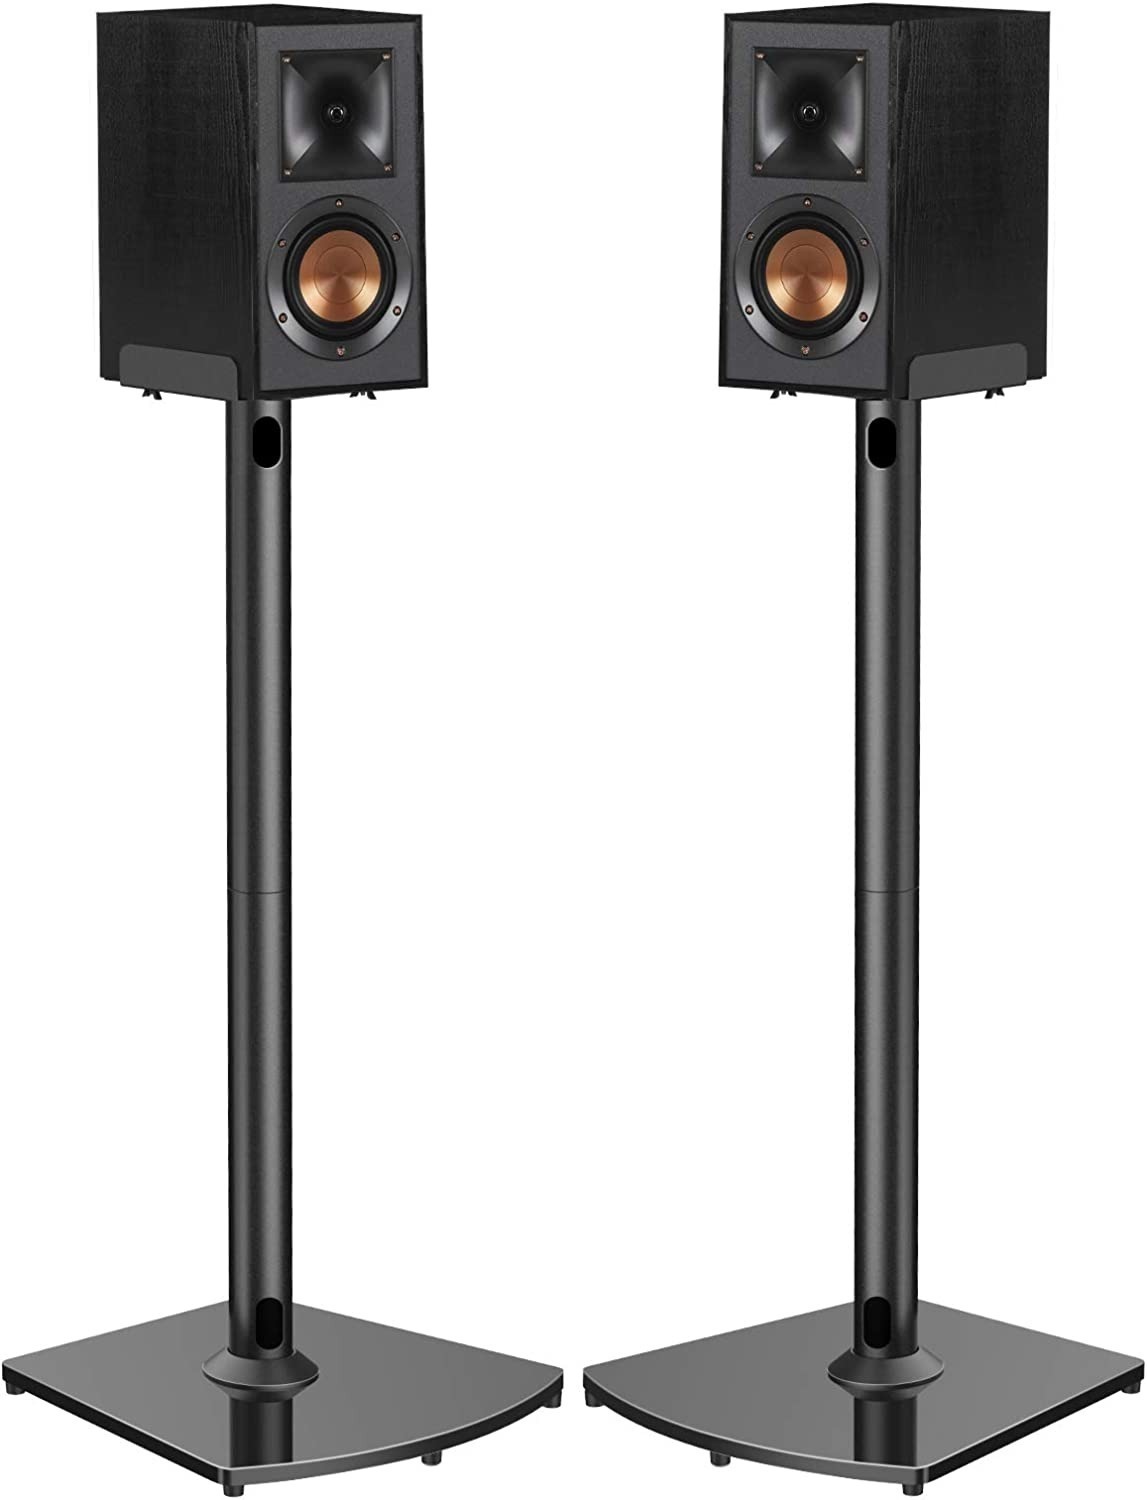 Perlegear Universal Speaker Stands w/ Cable Management (Up to 22-lbs) $36 + Free Shipping